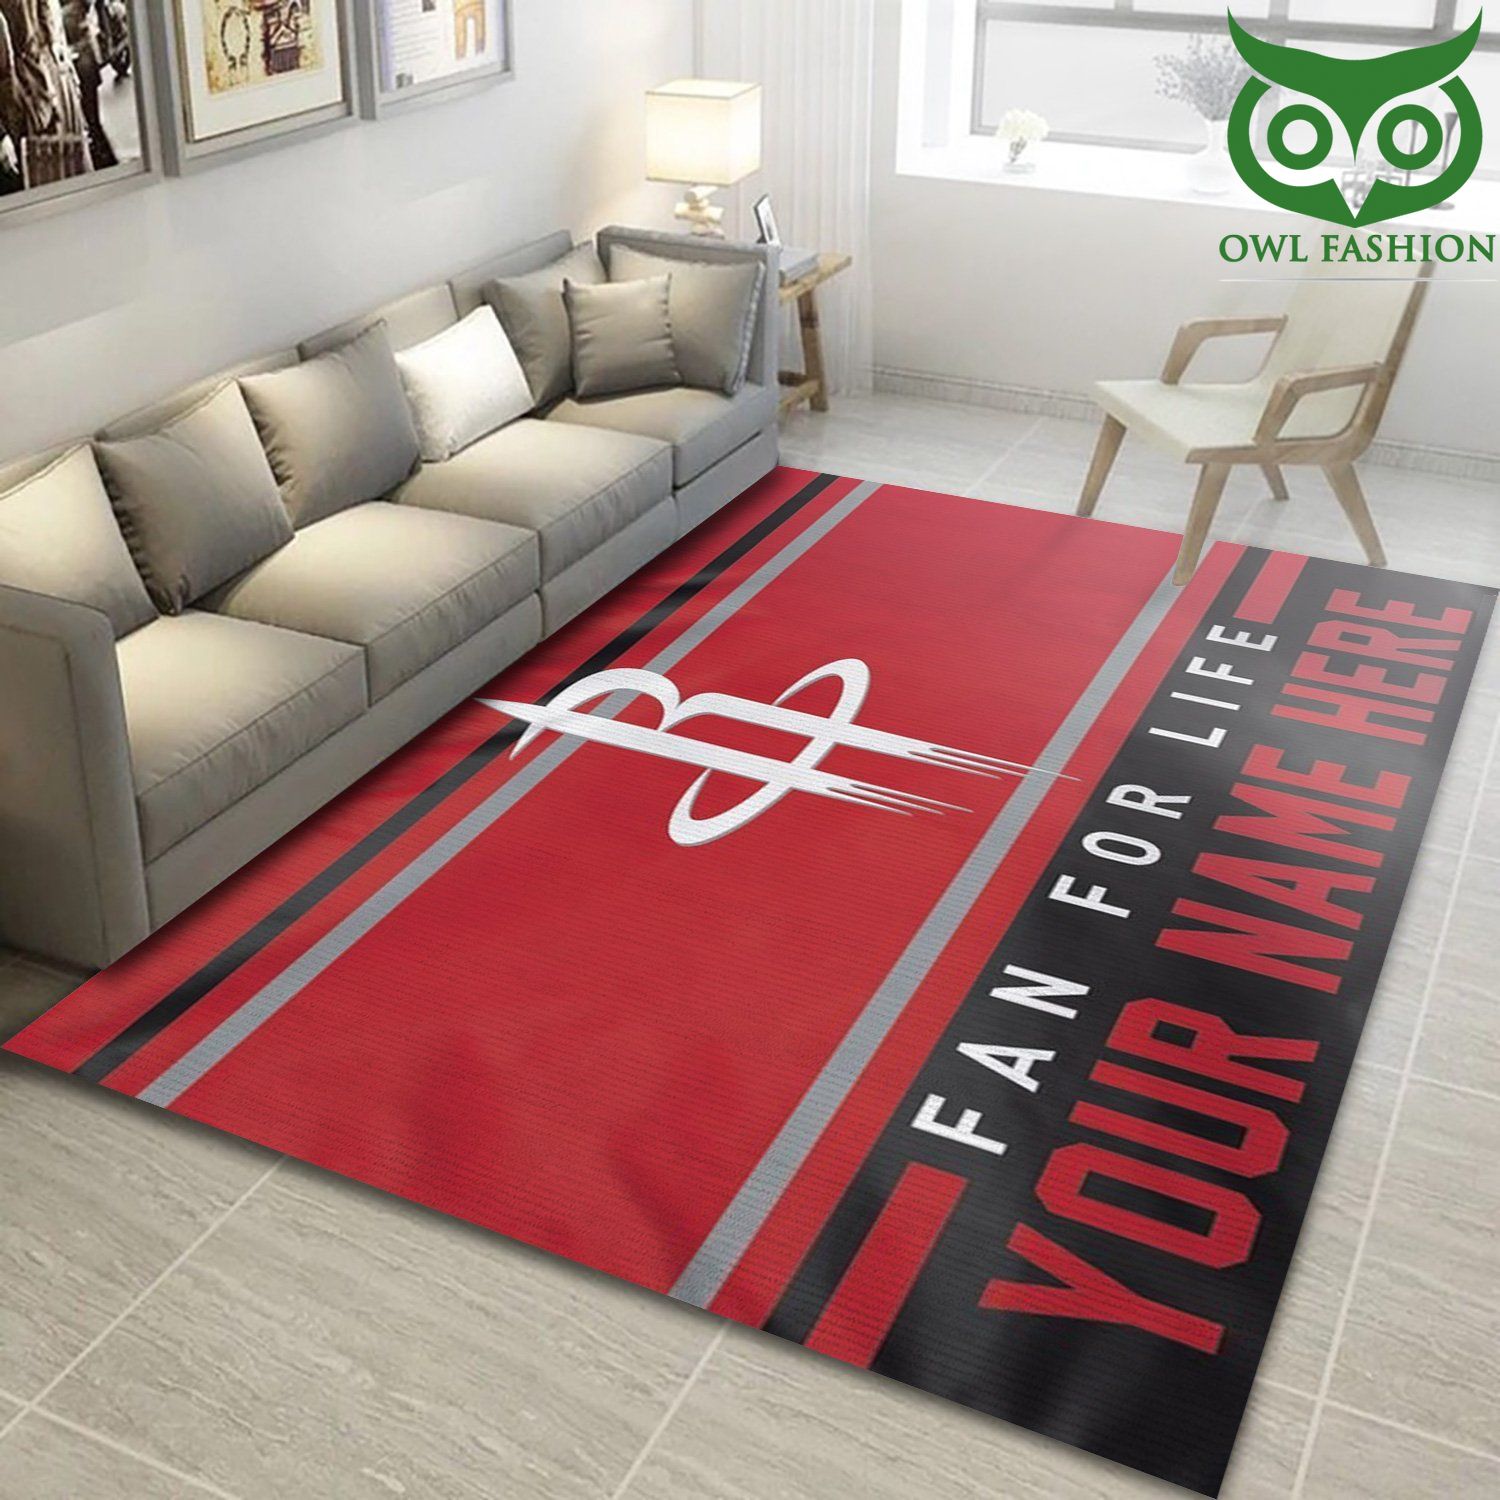 Customizable Houston Rockets Fan carpet rug Home and floor Decoration